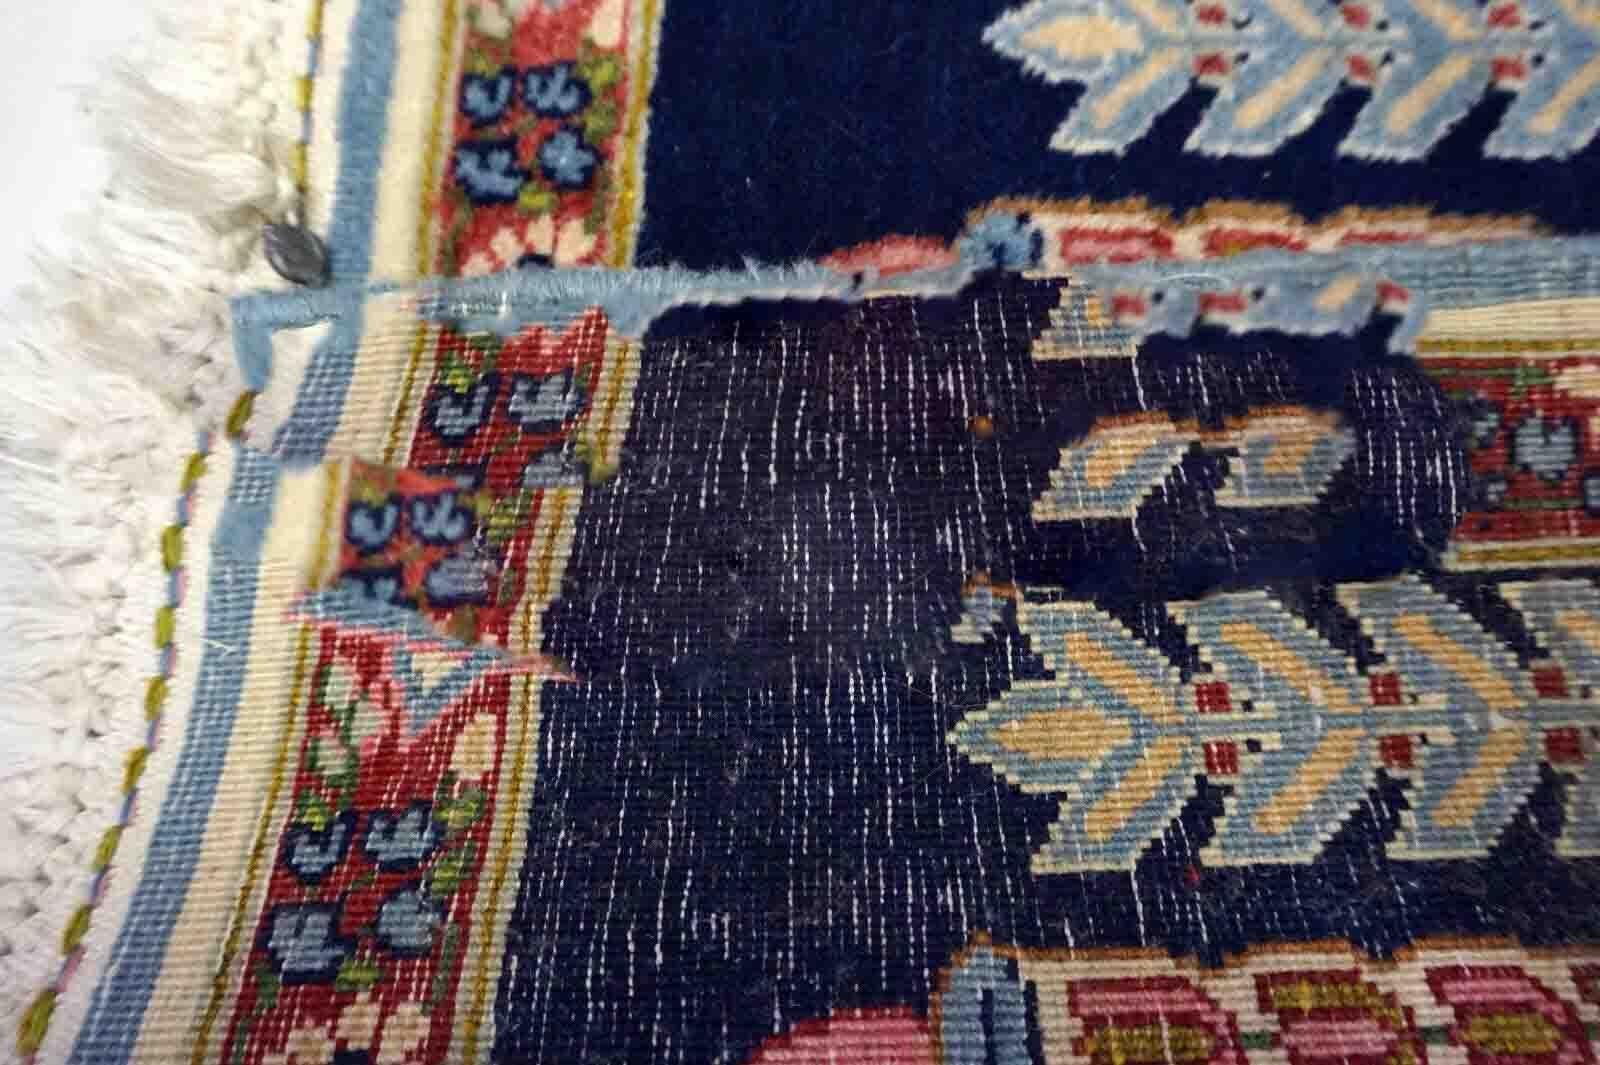 Introducing a stunning Handmade Antique Persian Kerman Mat from the 1930s. This authentic rug is made from premium quality wool and boasts a beautiful design featuring navy blue, sky blue, pink, and red colors in a Kerman style. The rug measures